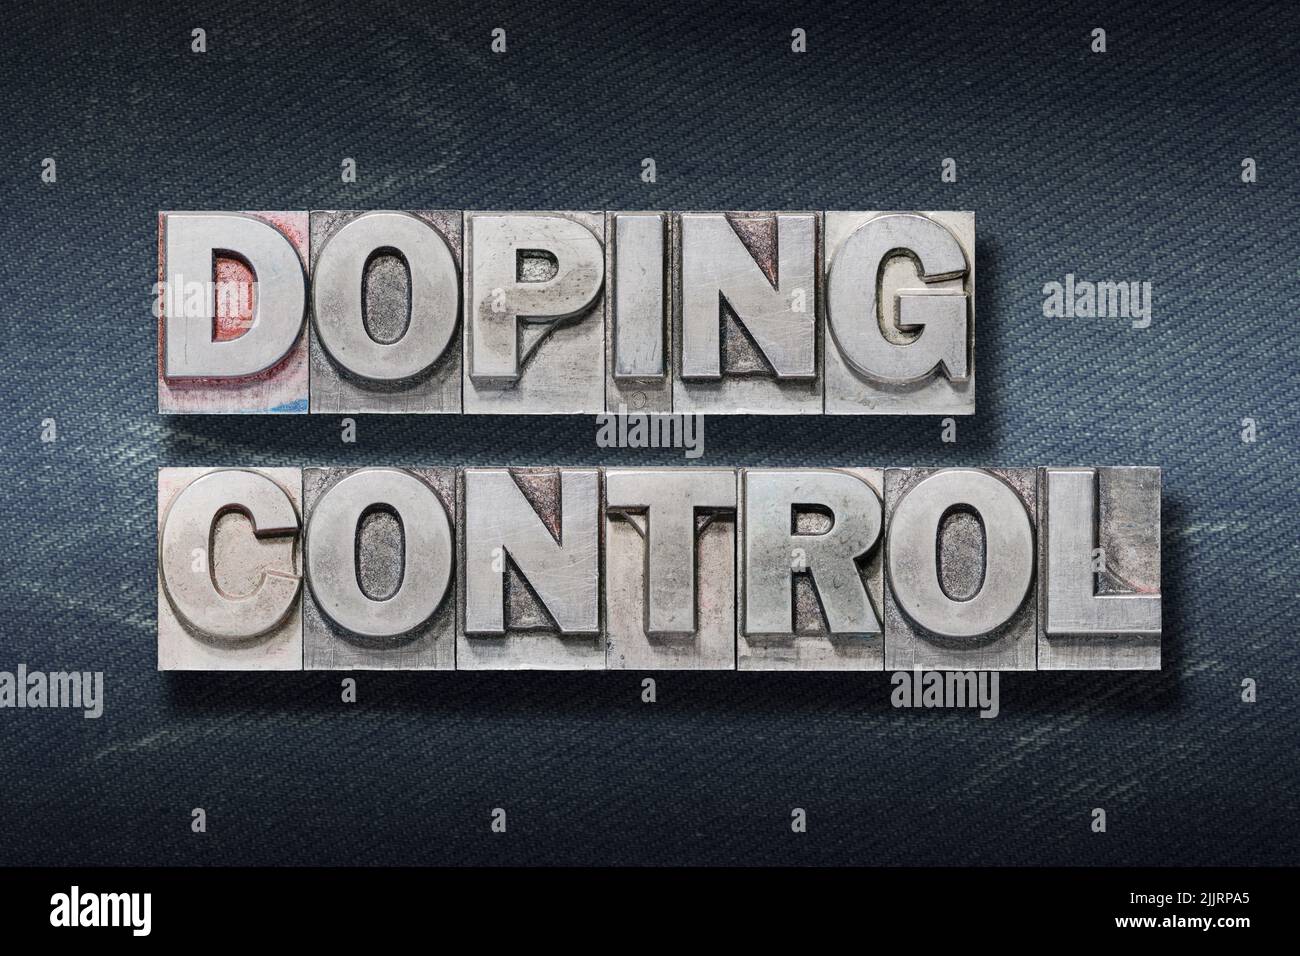 doping control phrase made from metallic letterpress on dark jeans background Stock Photo